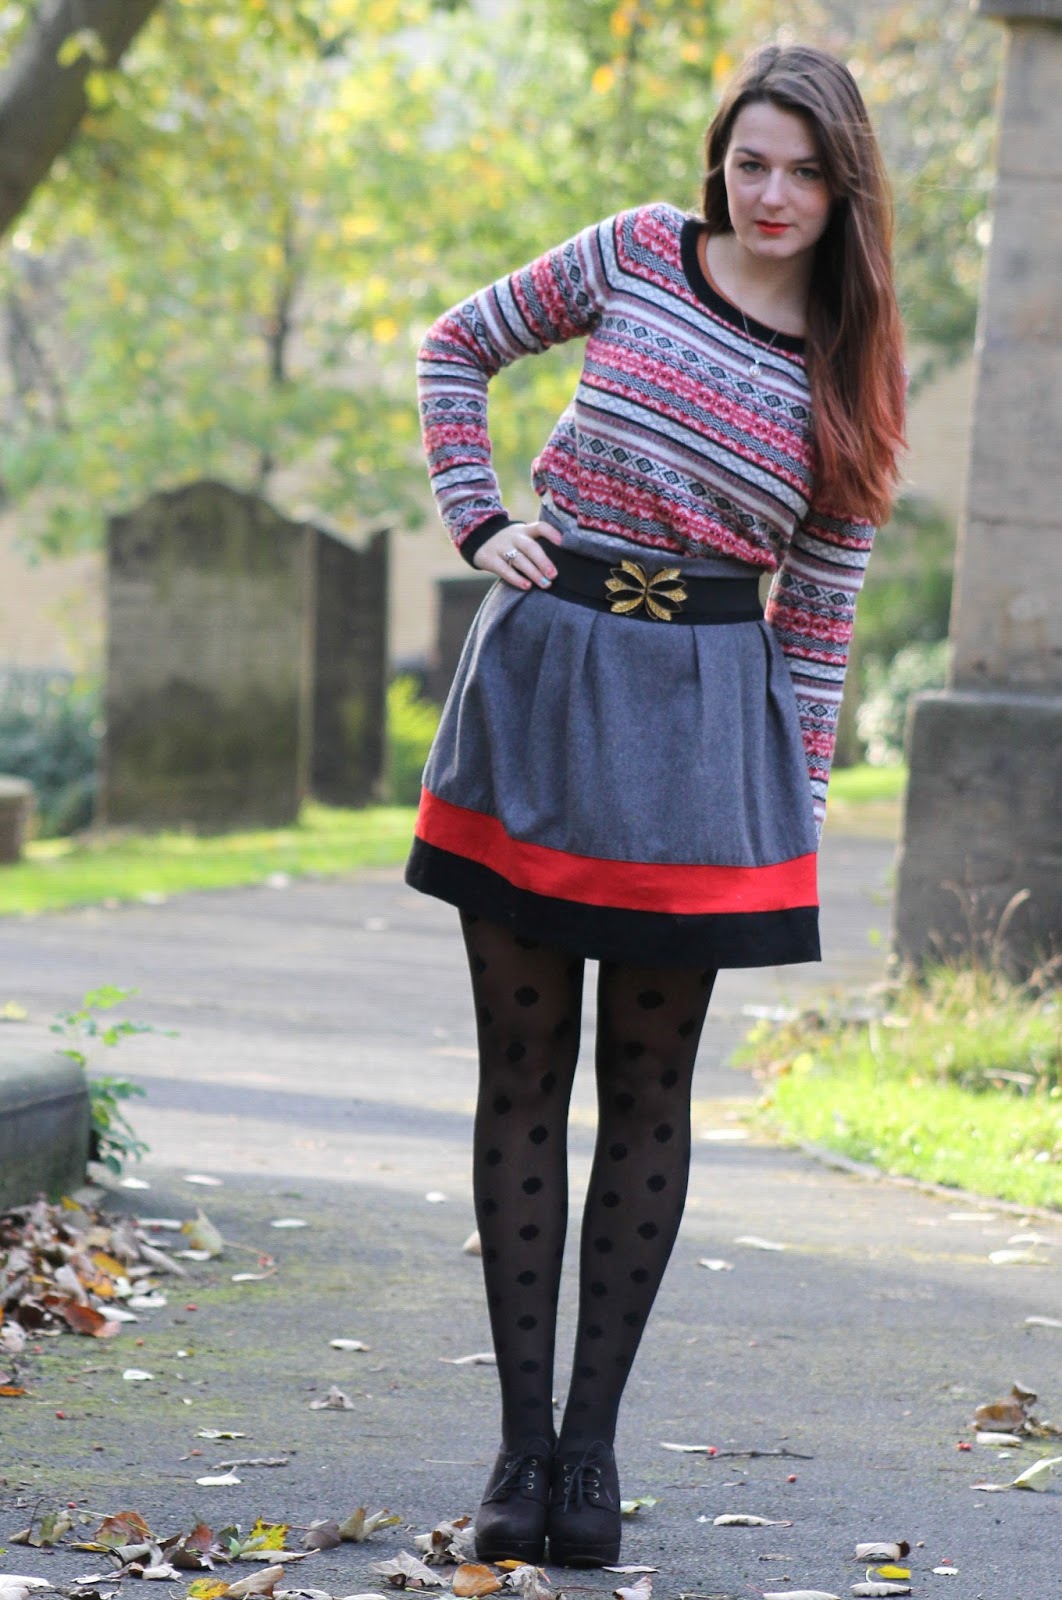 Blogger interview - Rebel Angel - Fashionmylegs : The tights and ...